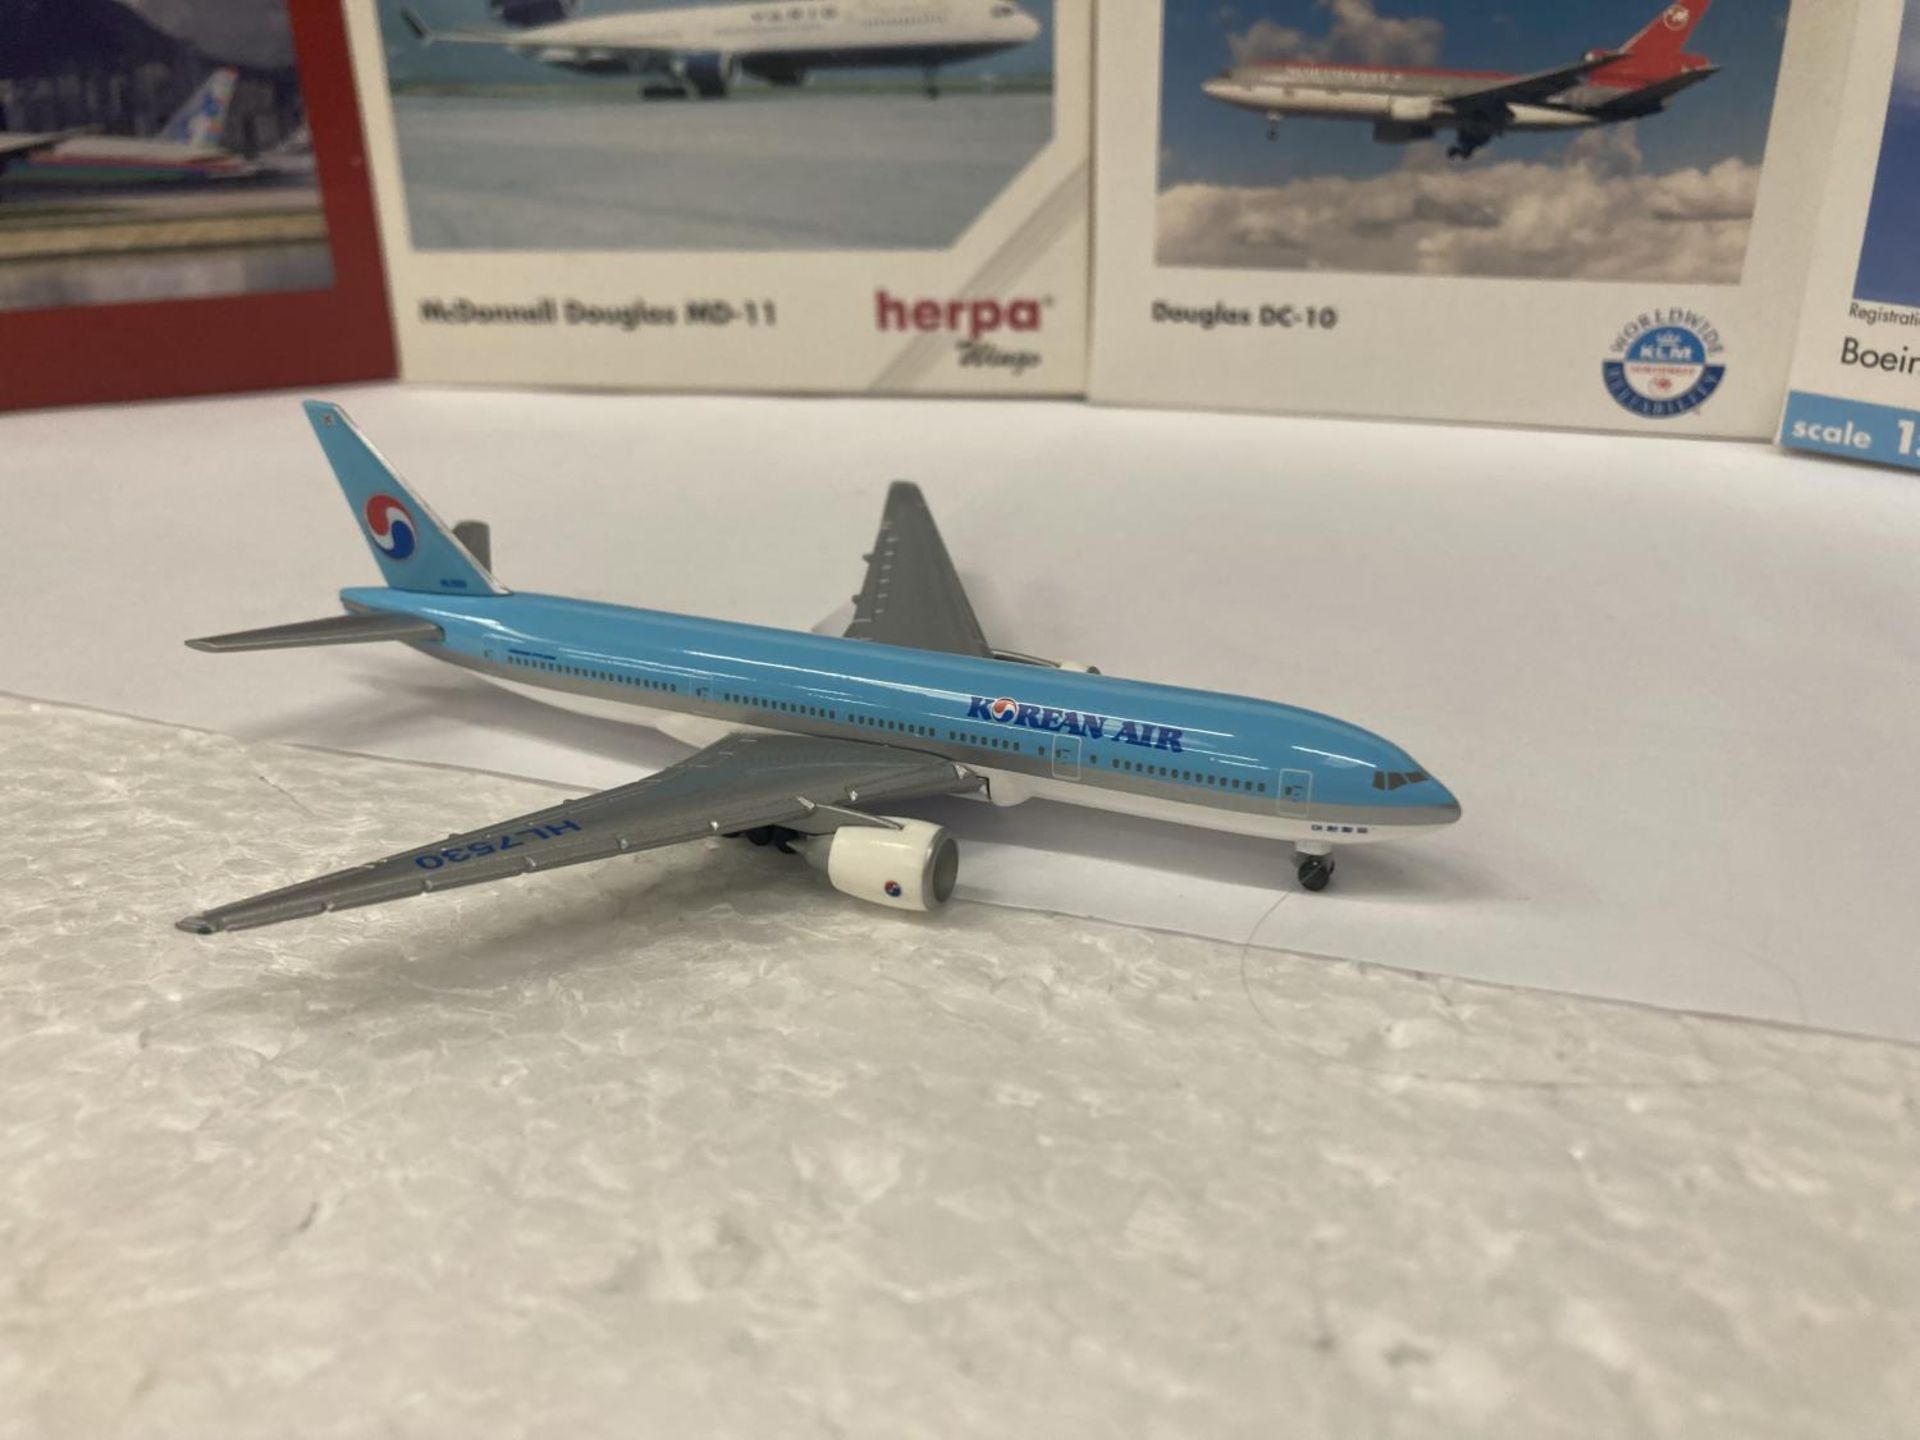 FOUR HERPA WINGS COLLECTION PLANES TO INCLUDE - KOREAN AIR BOEING 777-200 NO. 506458, NORTHWEST - Image 5 of 7